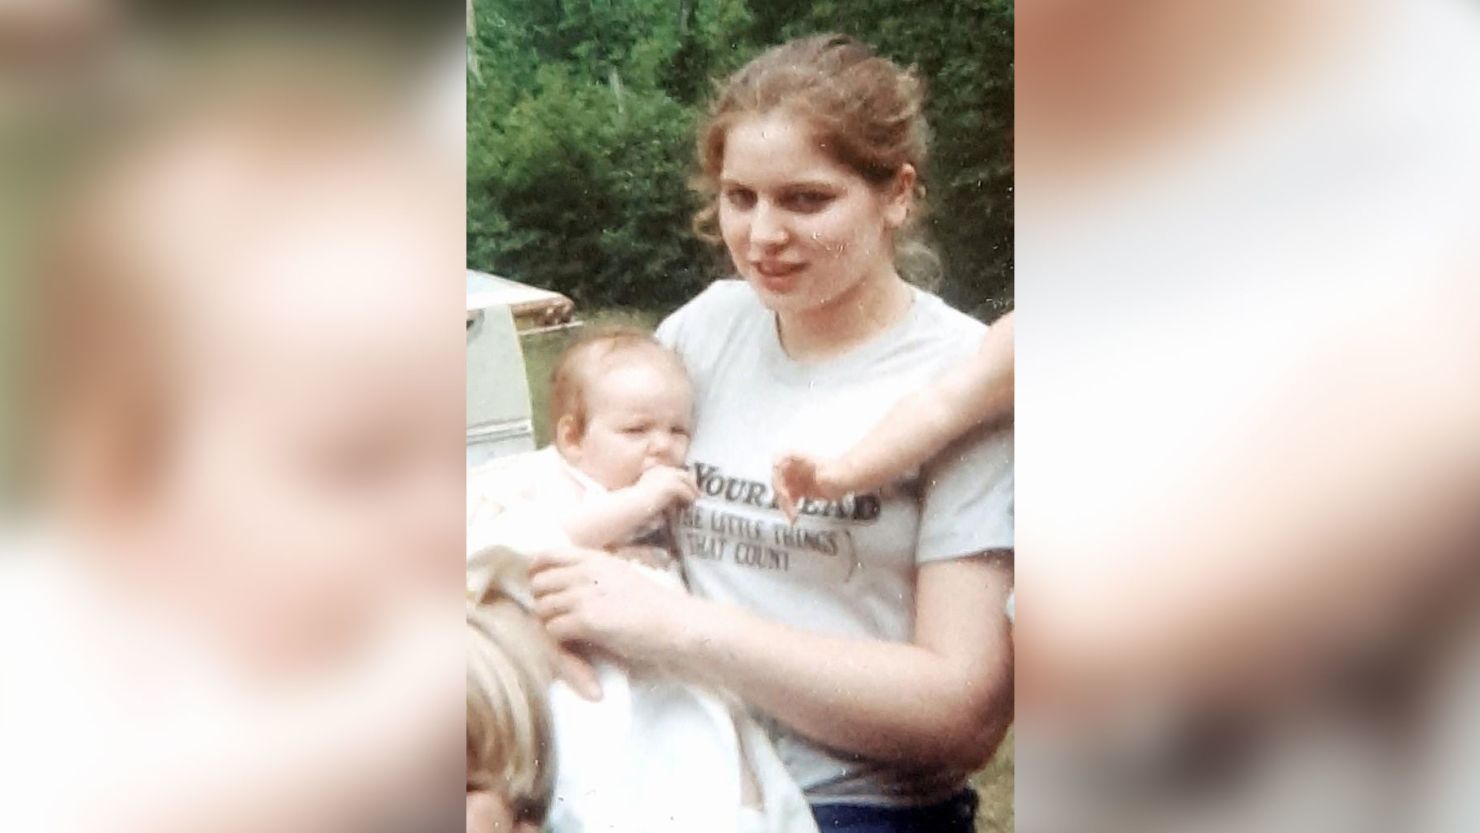 Her mother vanished when she was 1. More than 40 years later, strangers ...